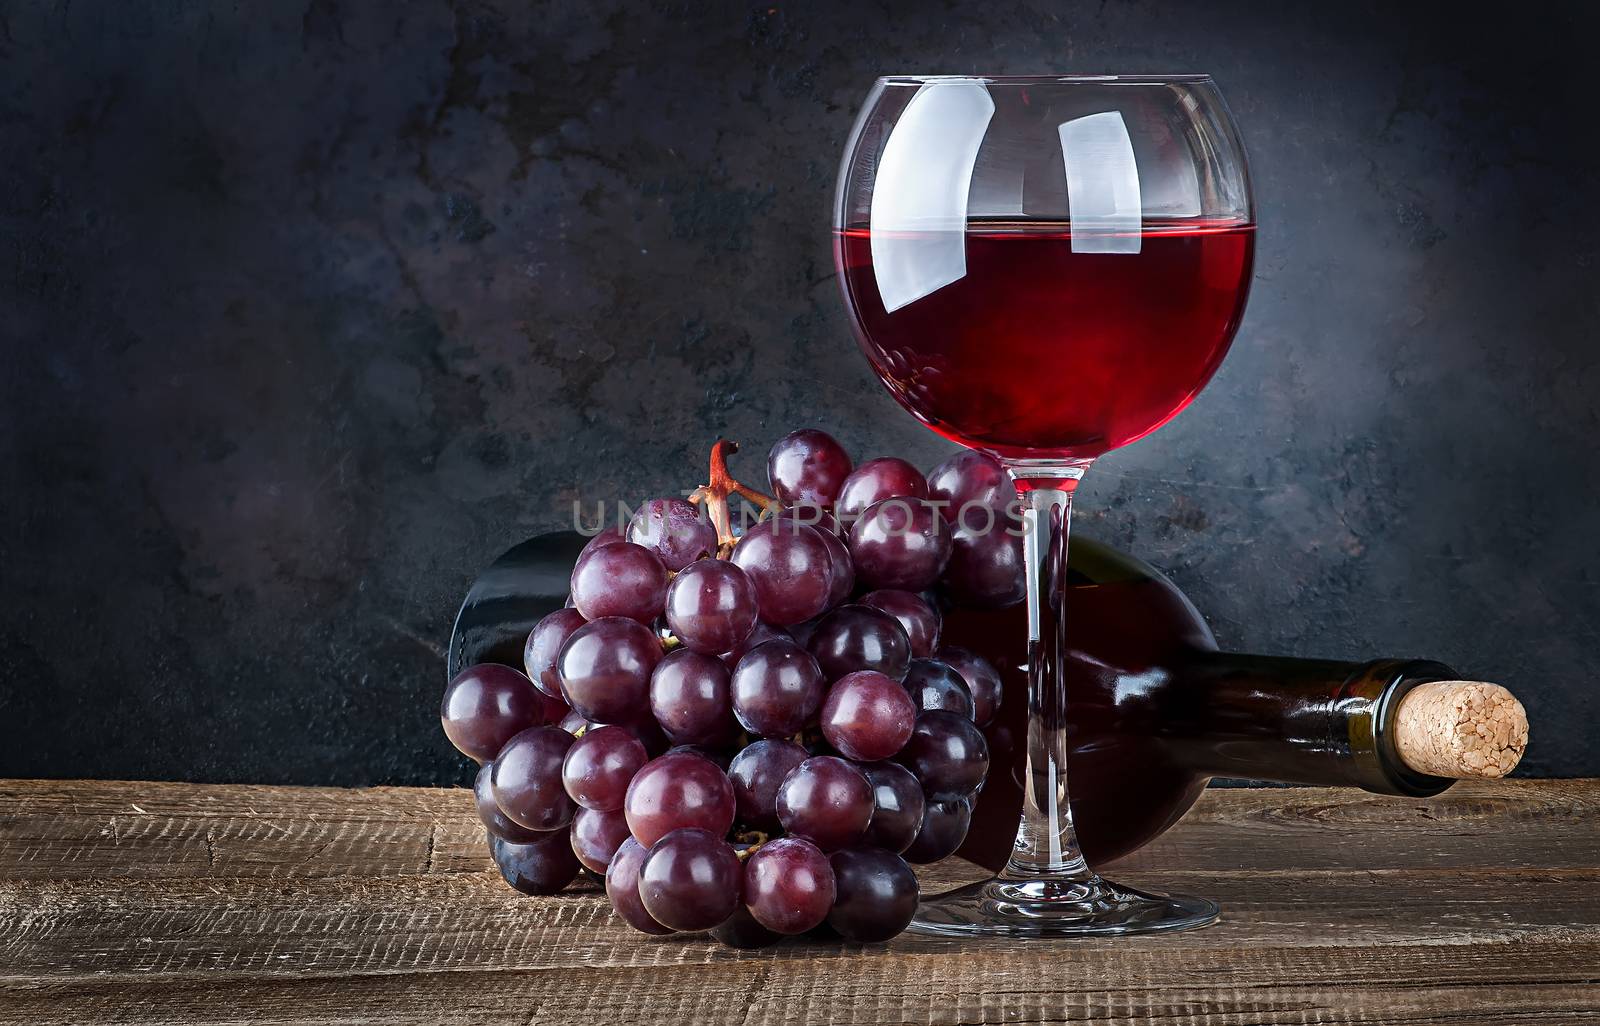 Glass of red wine with grapes and bottle on a wooden table. The bottle lies. Dark background.